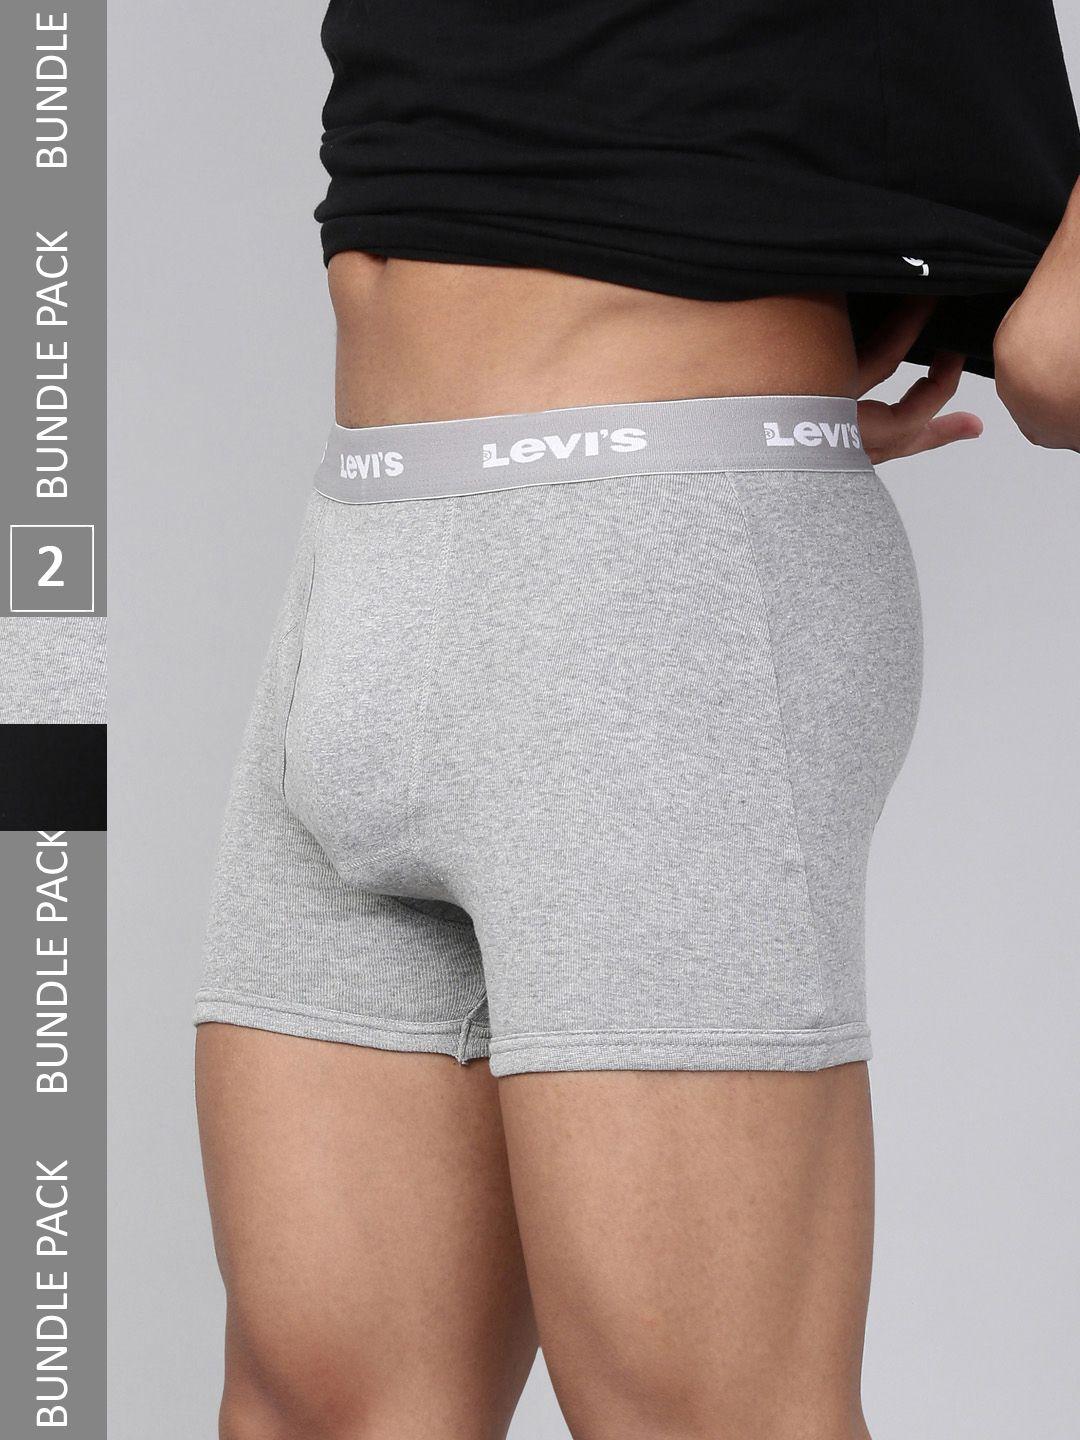 levis pack of 2 smartskin technology cotton trunks with tag free comfort #001-boxer brief